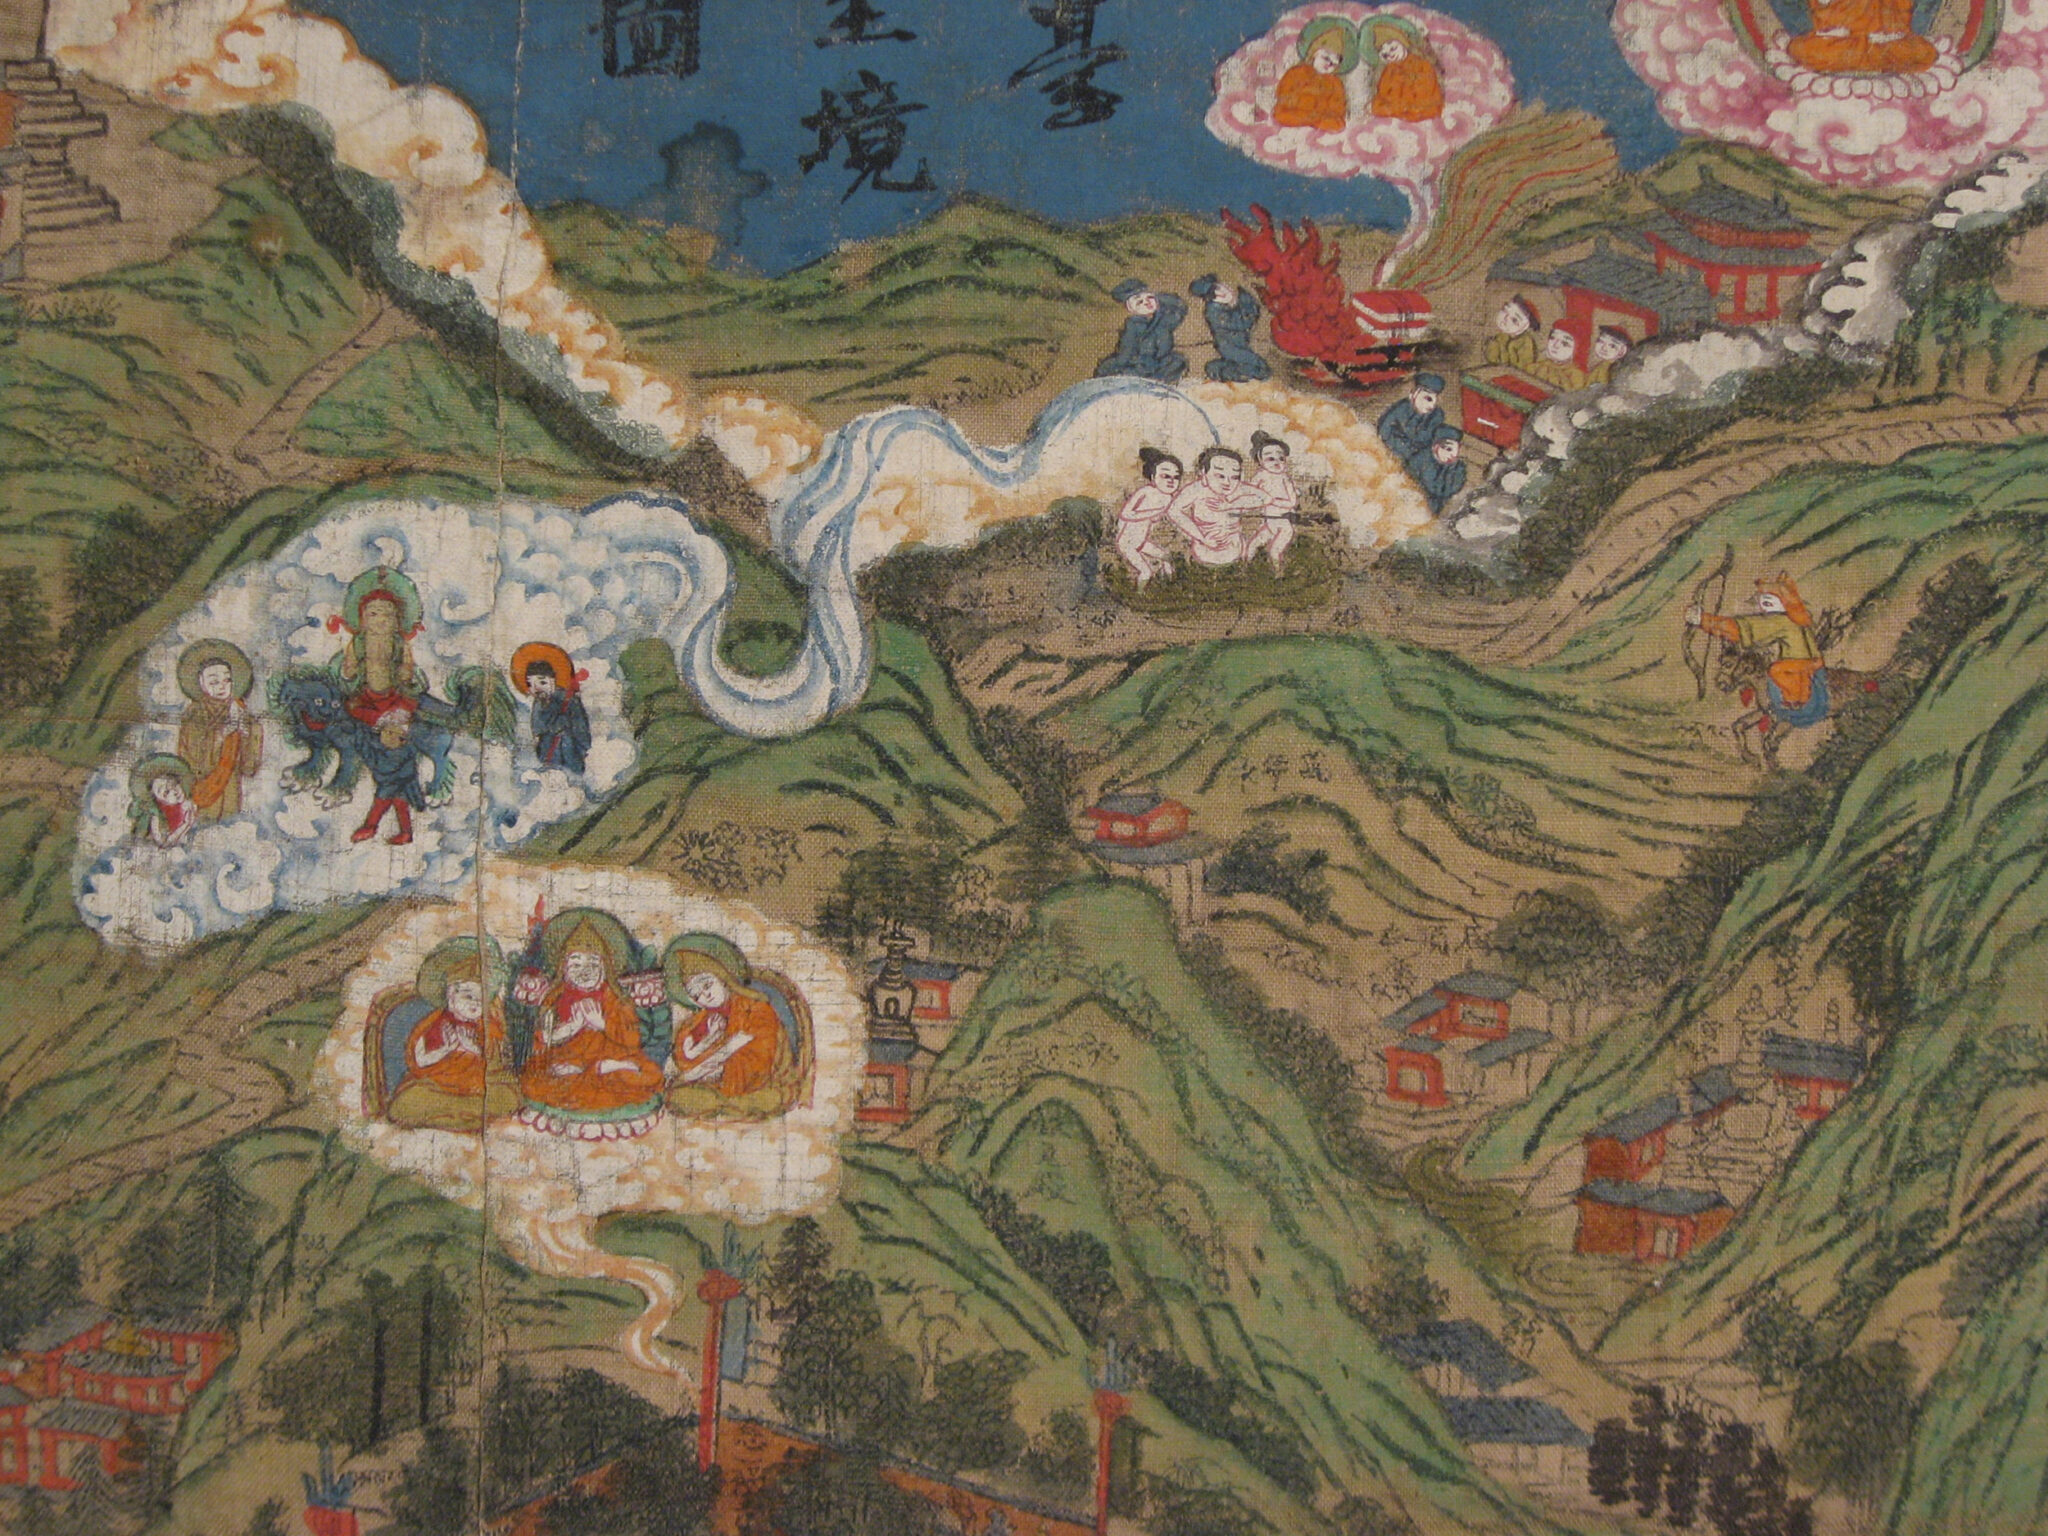 Archer aims arrow towards deity in lush mountain landscape replete with figures and building complexes